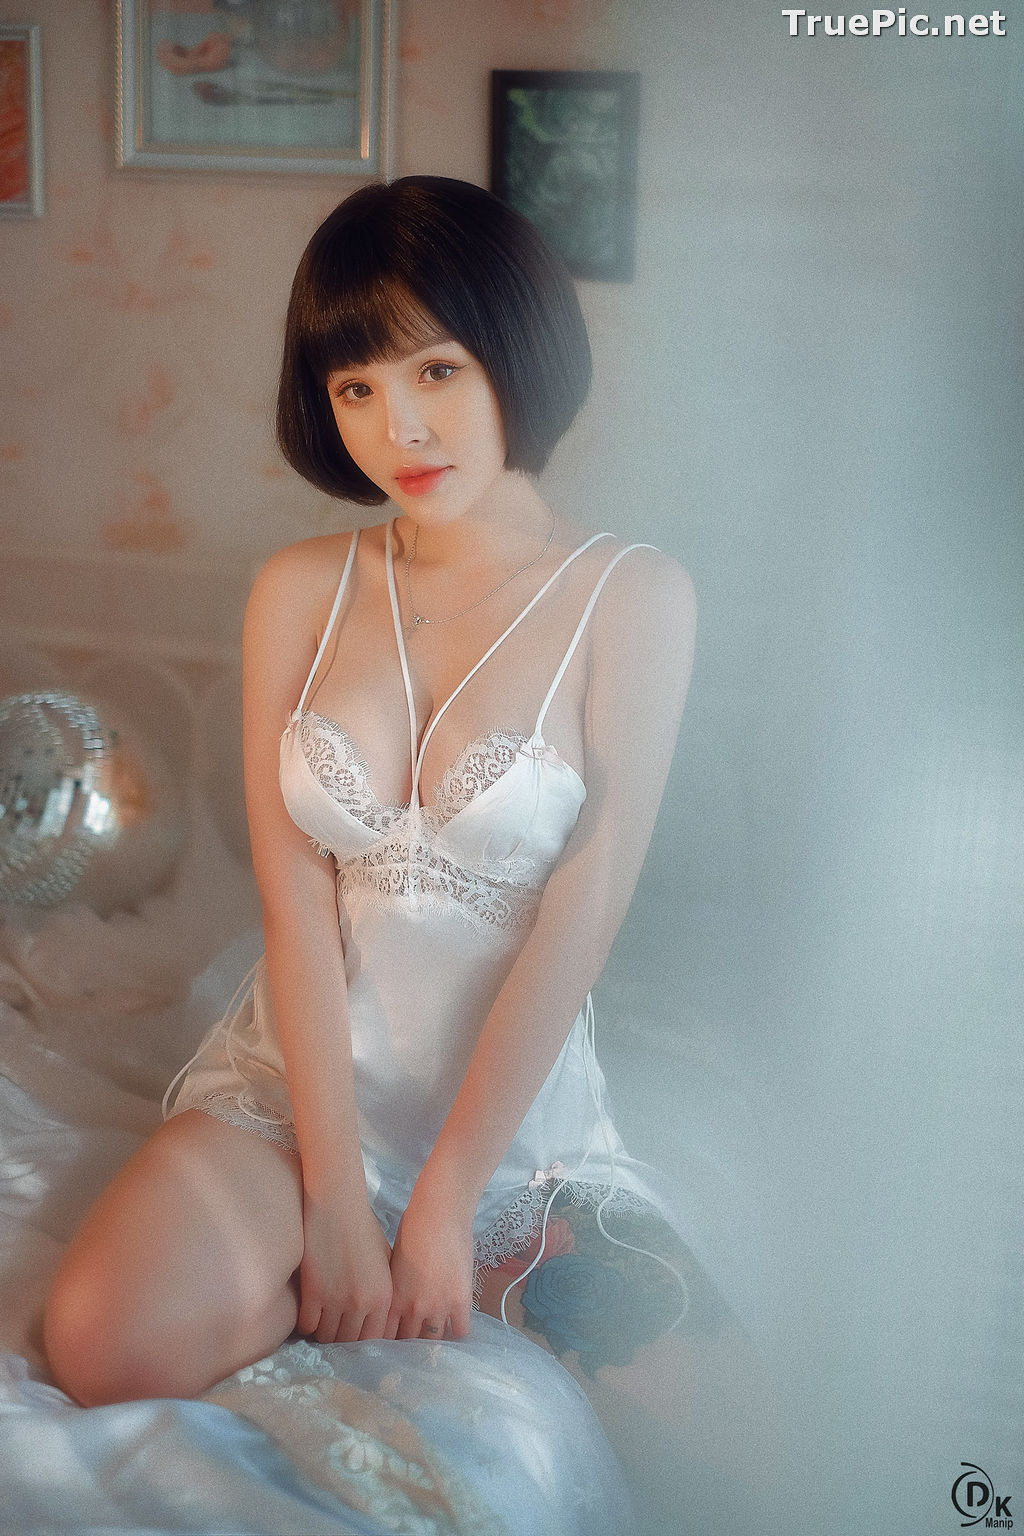 Image Vietnamese Model – Cute Short-haired Girl in White Sexy Sleepwear - TruePic.net - Picture-16